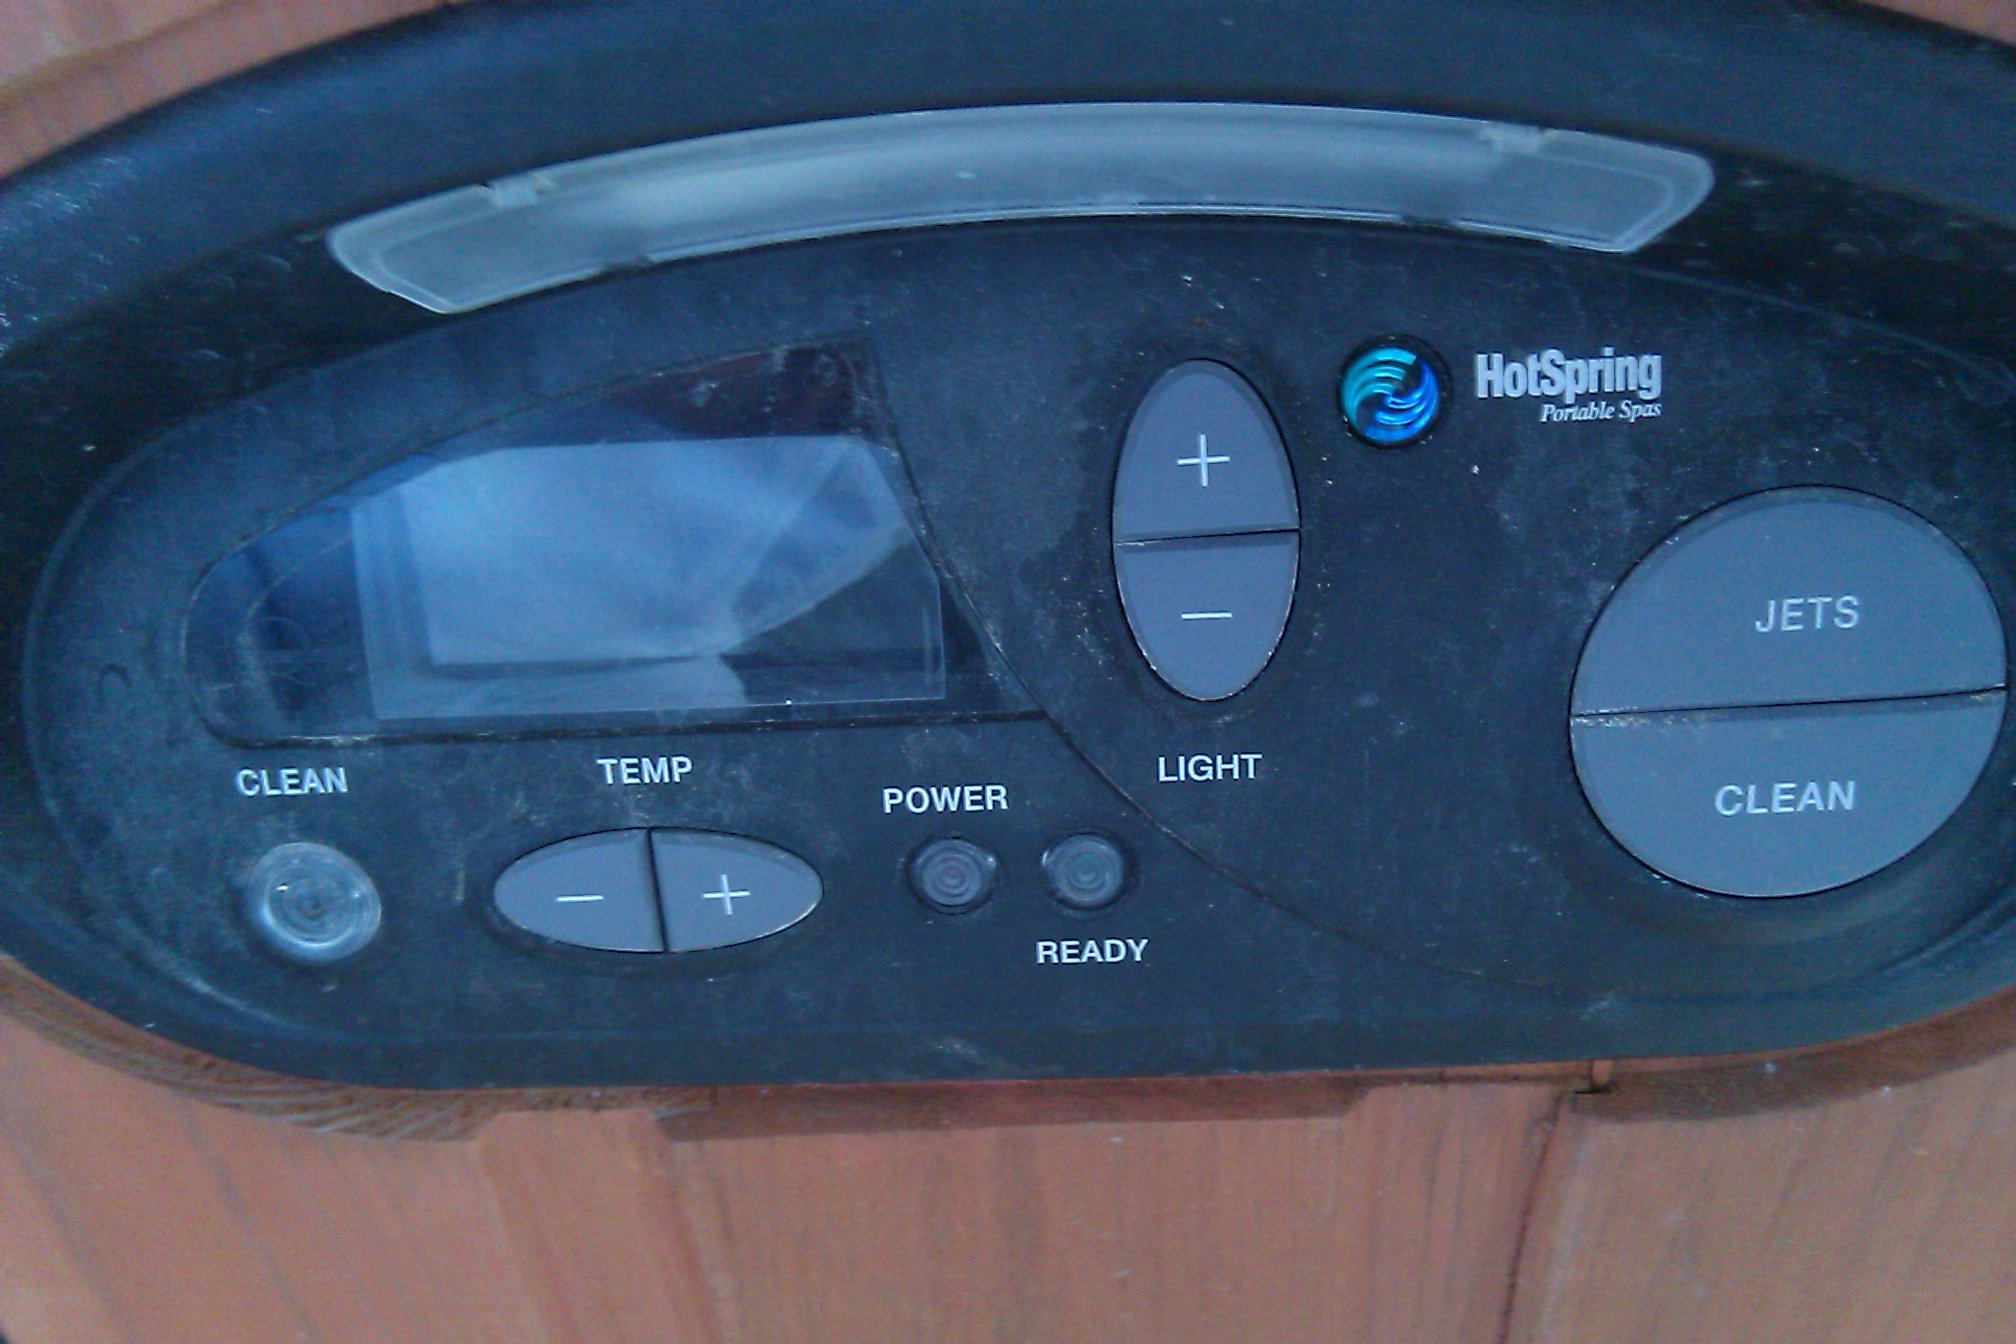 hot spring spa control panel instructions